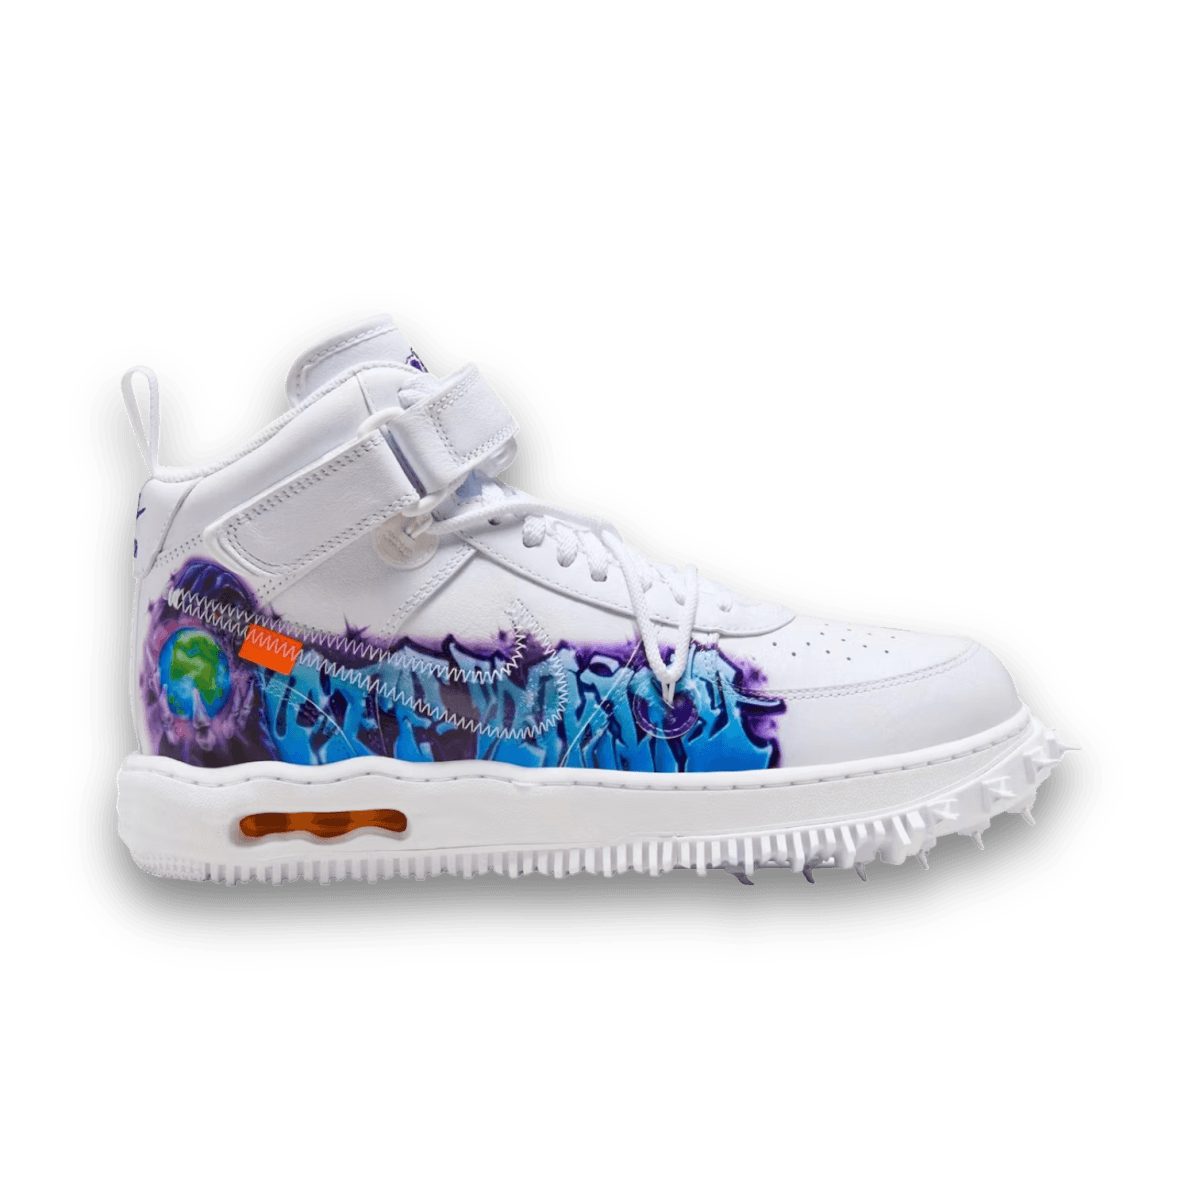 Air Force 1 Mid Off-White Graffiti White - Low Sneaker - Jawns on Fire Sneakers & Streetwear